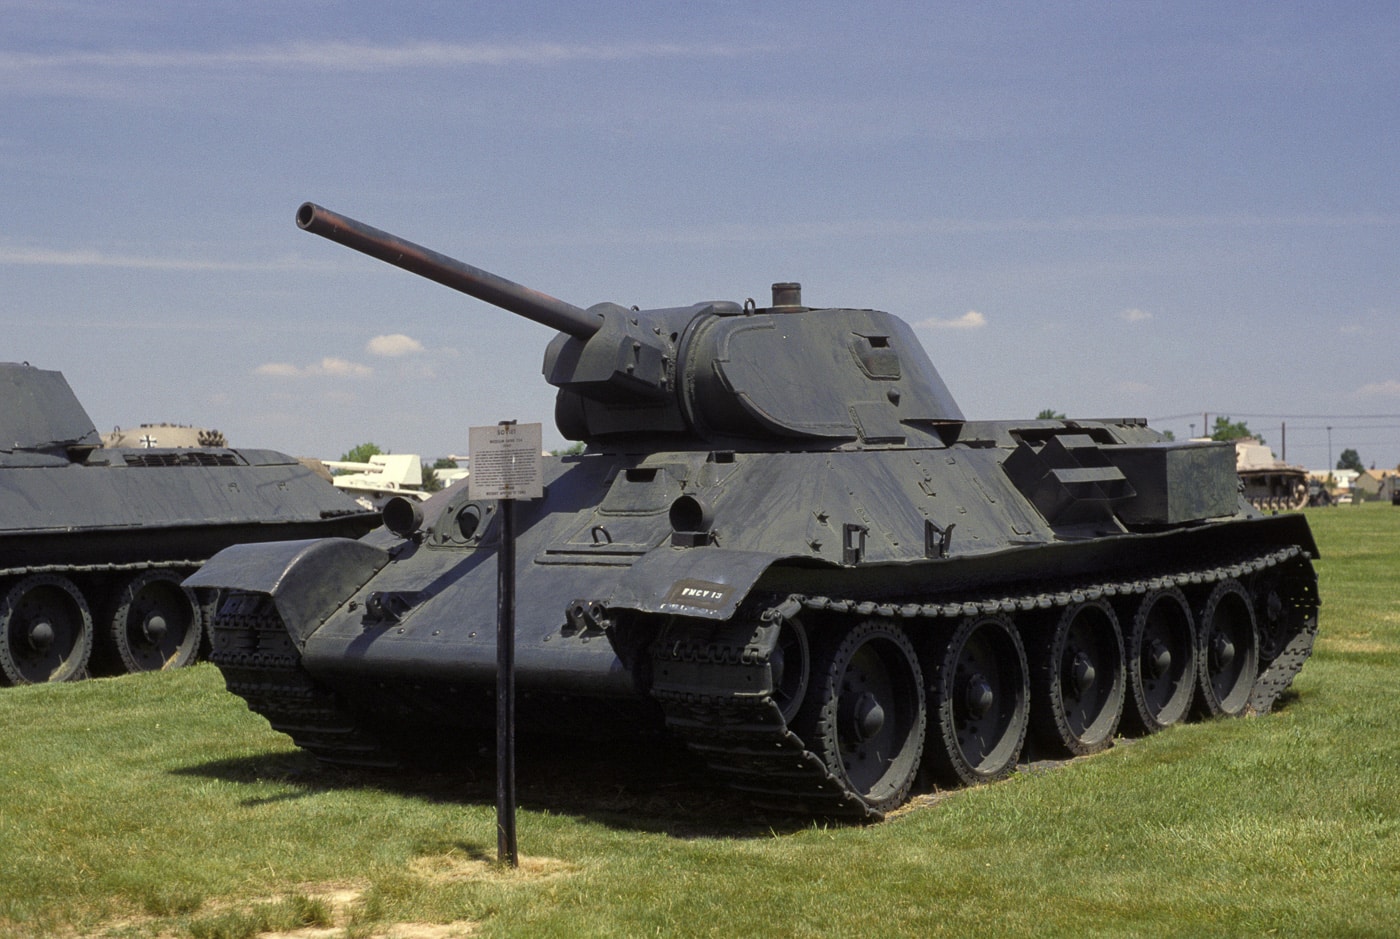 t-34 tank on display at aberdeen